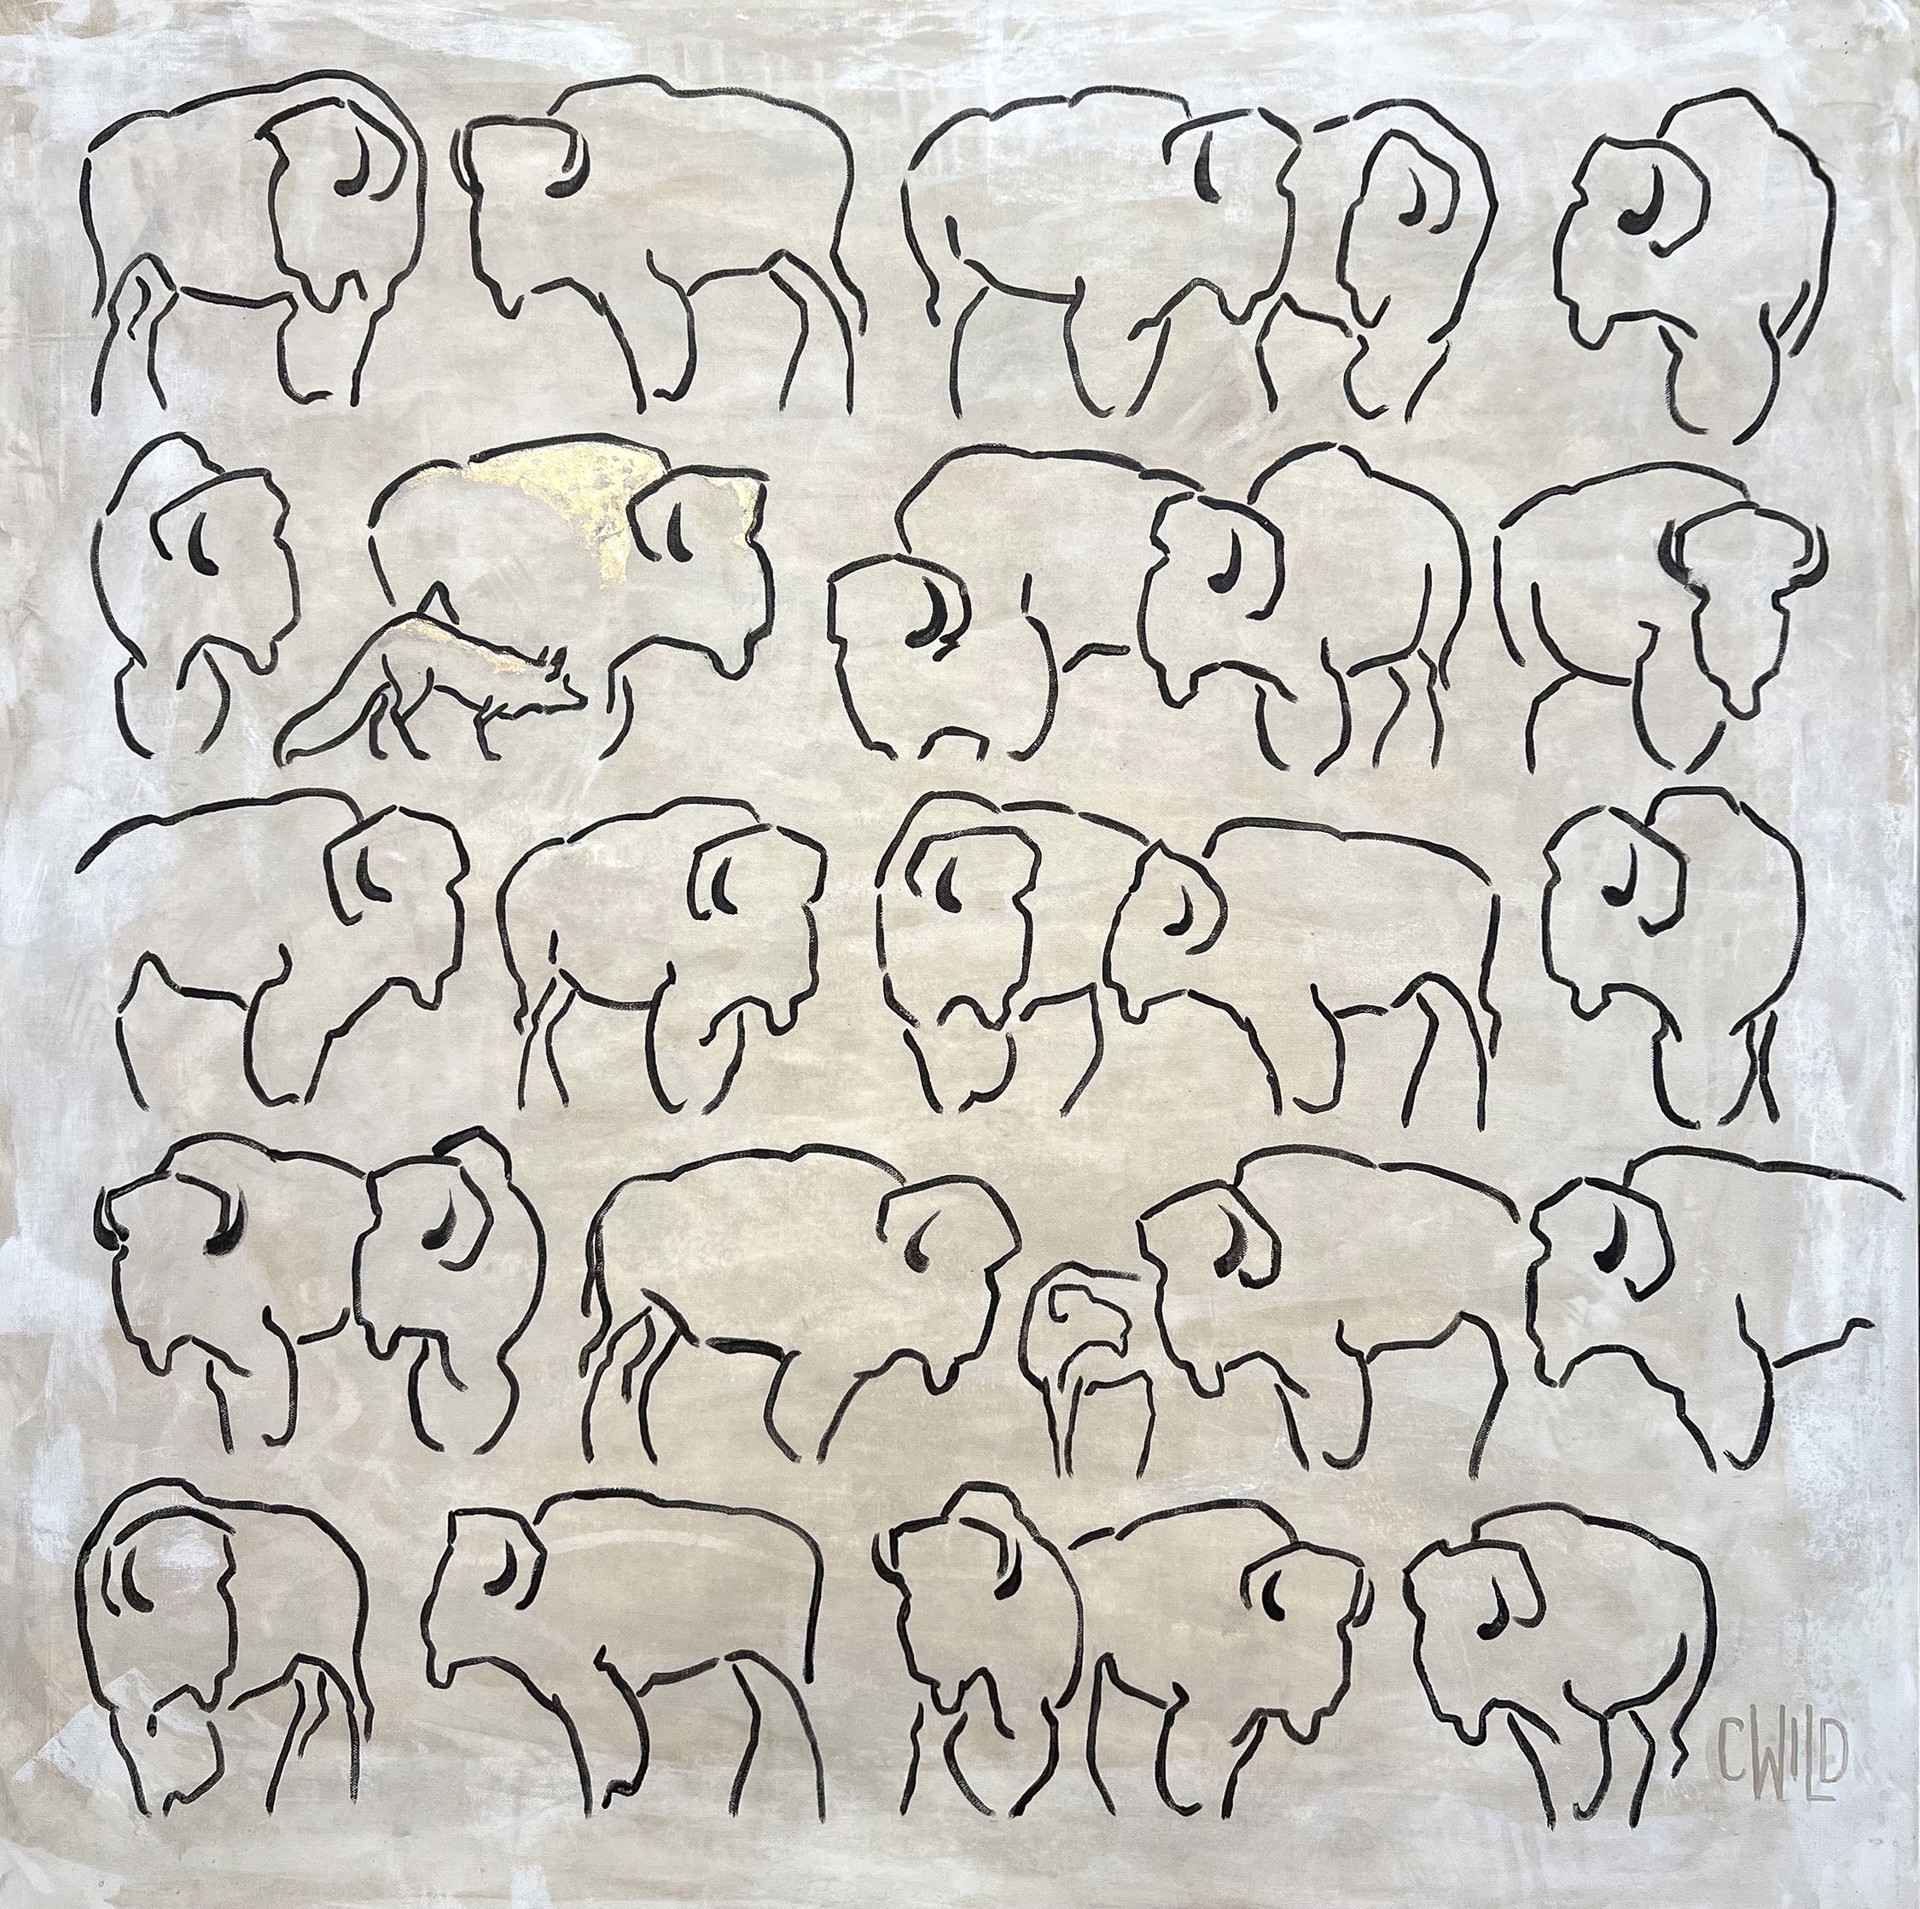 Original Painting Featuring Five Rows Of Line Drawn Bison Silhouettes in Black Over Abstract White And Tan Background With Gold Leaf Detail